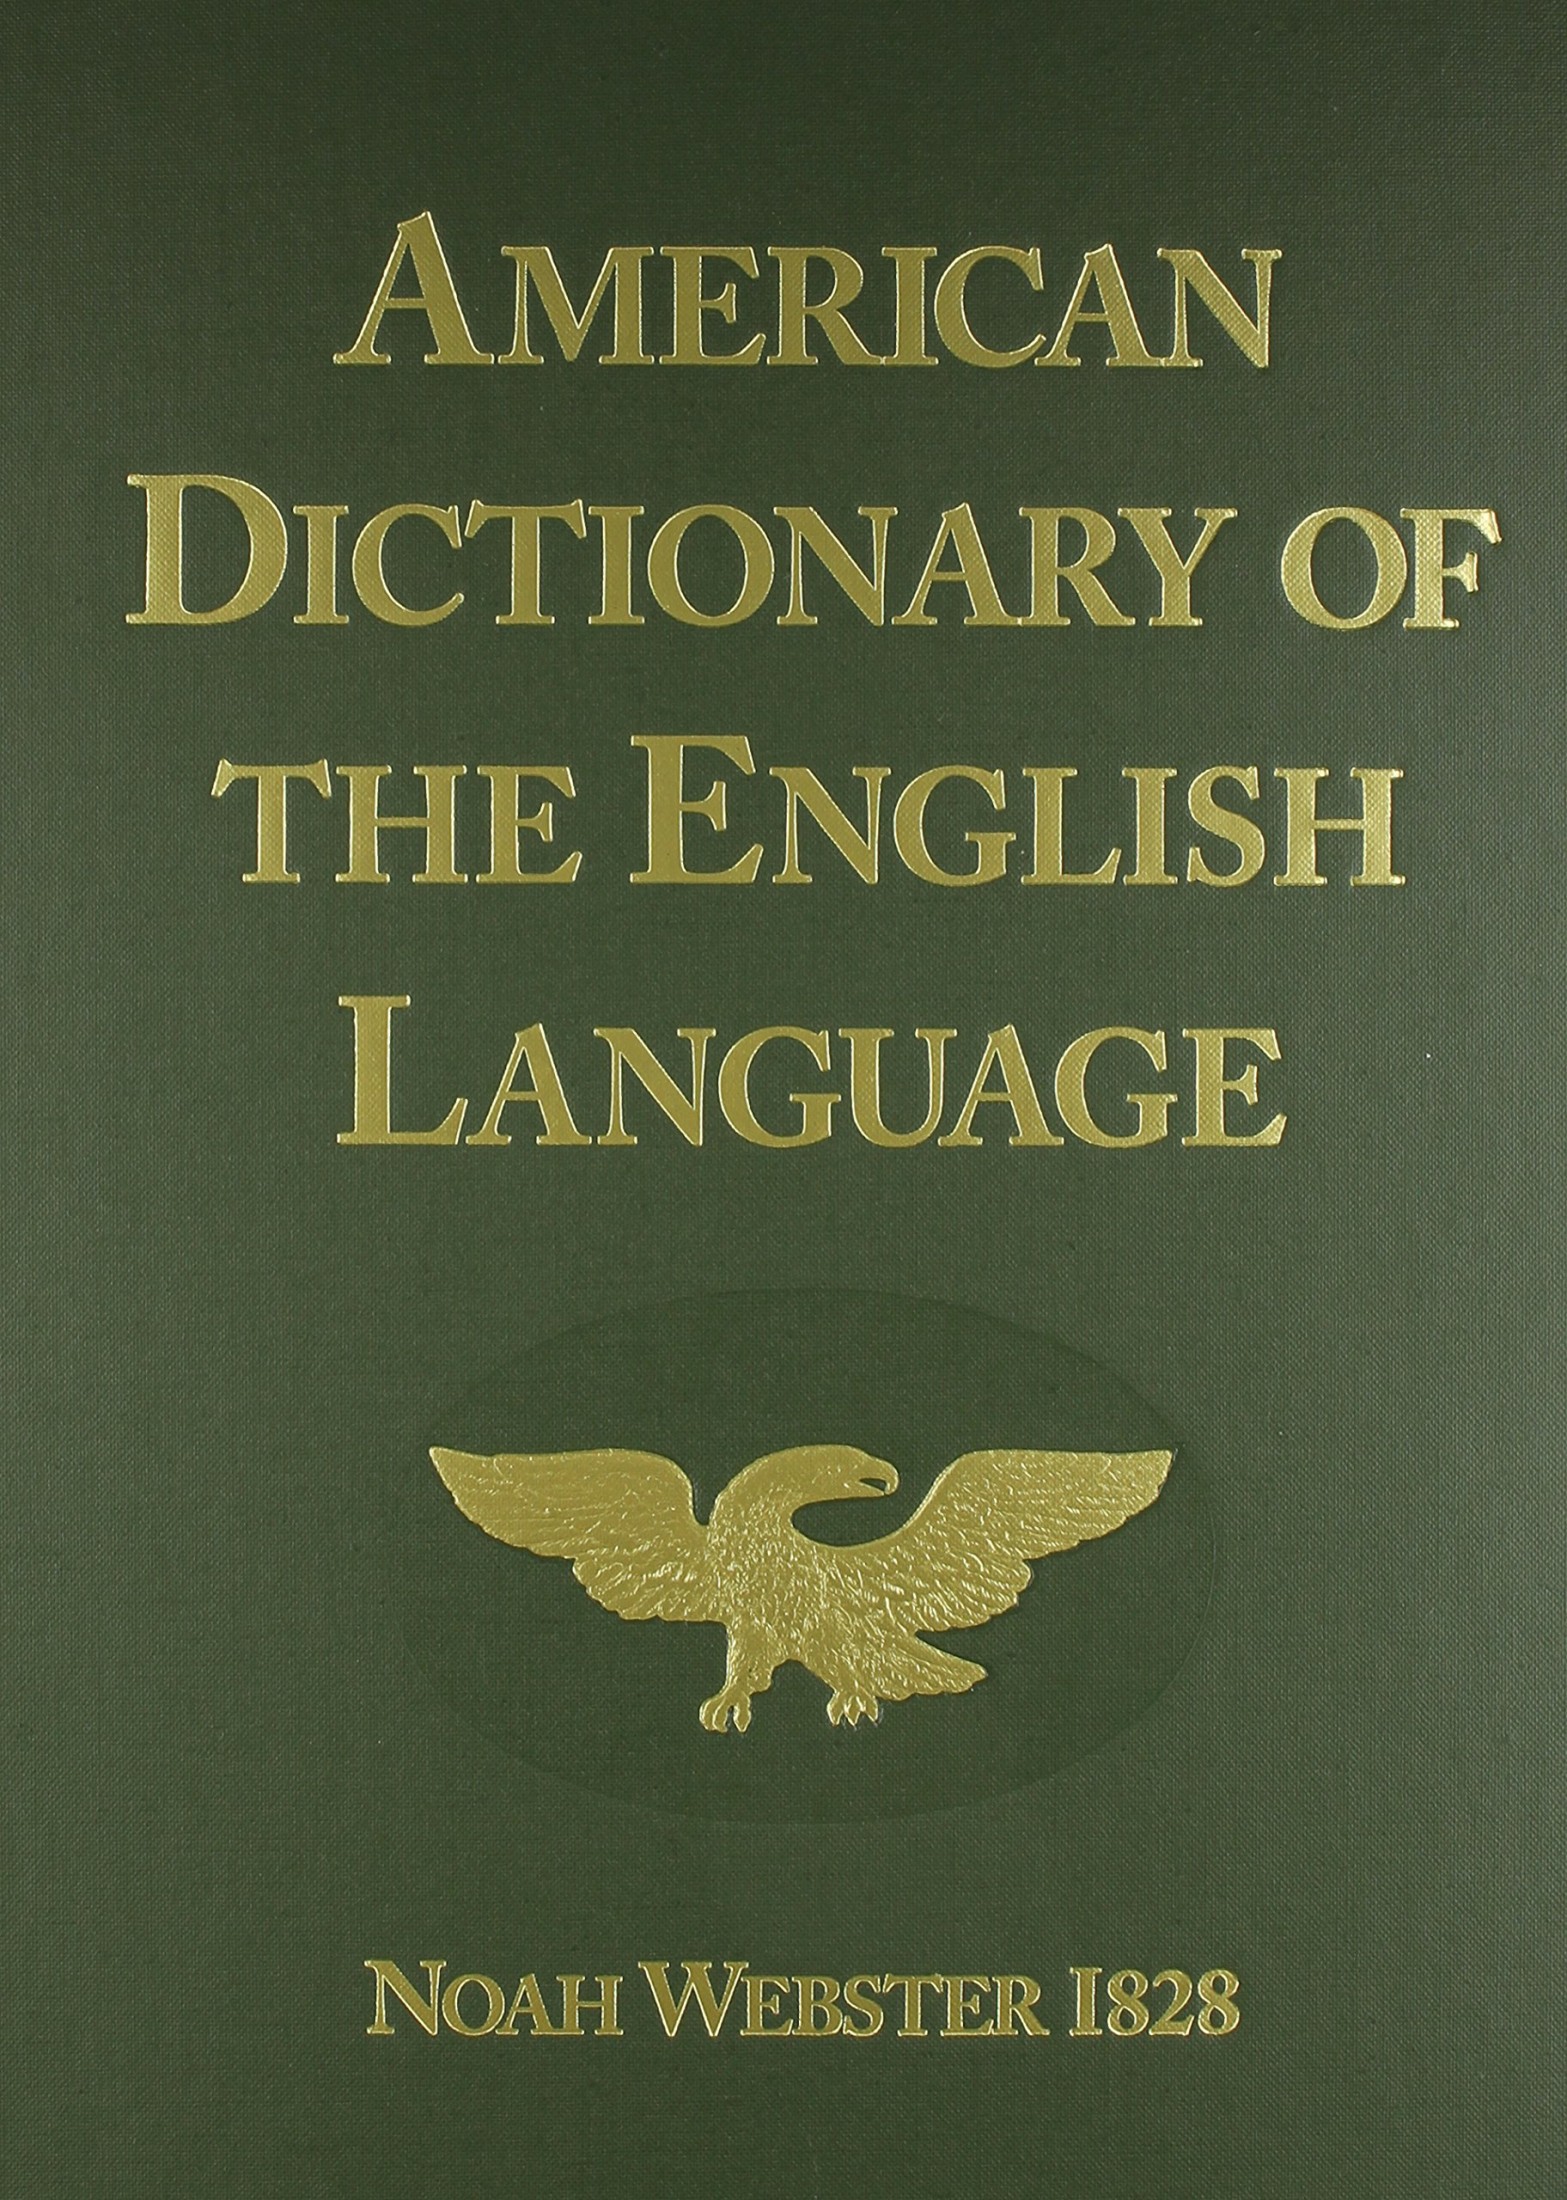 American Dictionary of the English Language (1828 Edition)